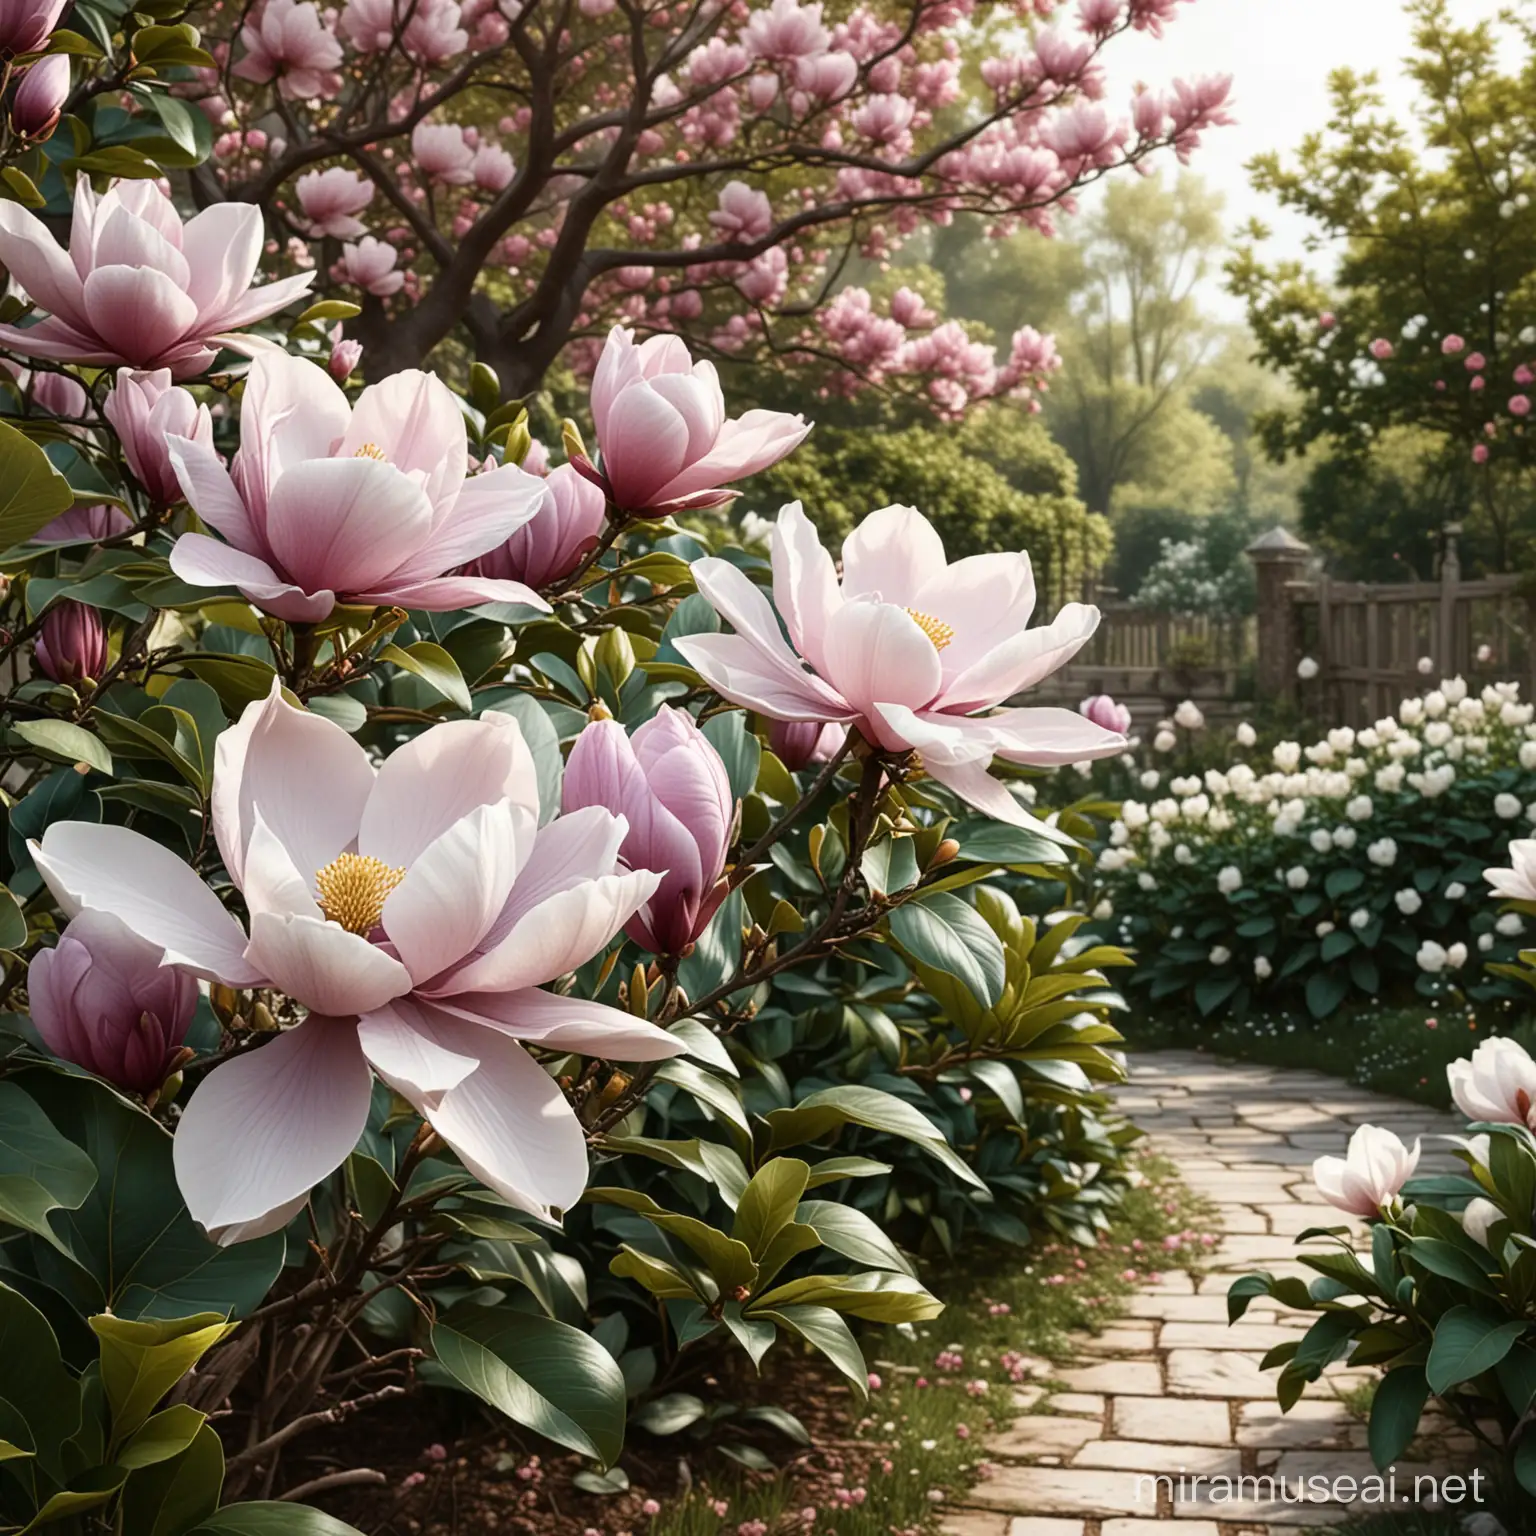 Realistic Magnolia Flowers Blooming in a Lush Garden